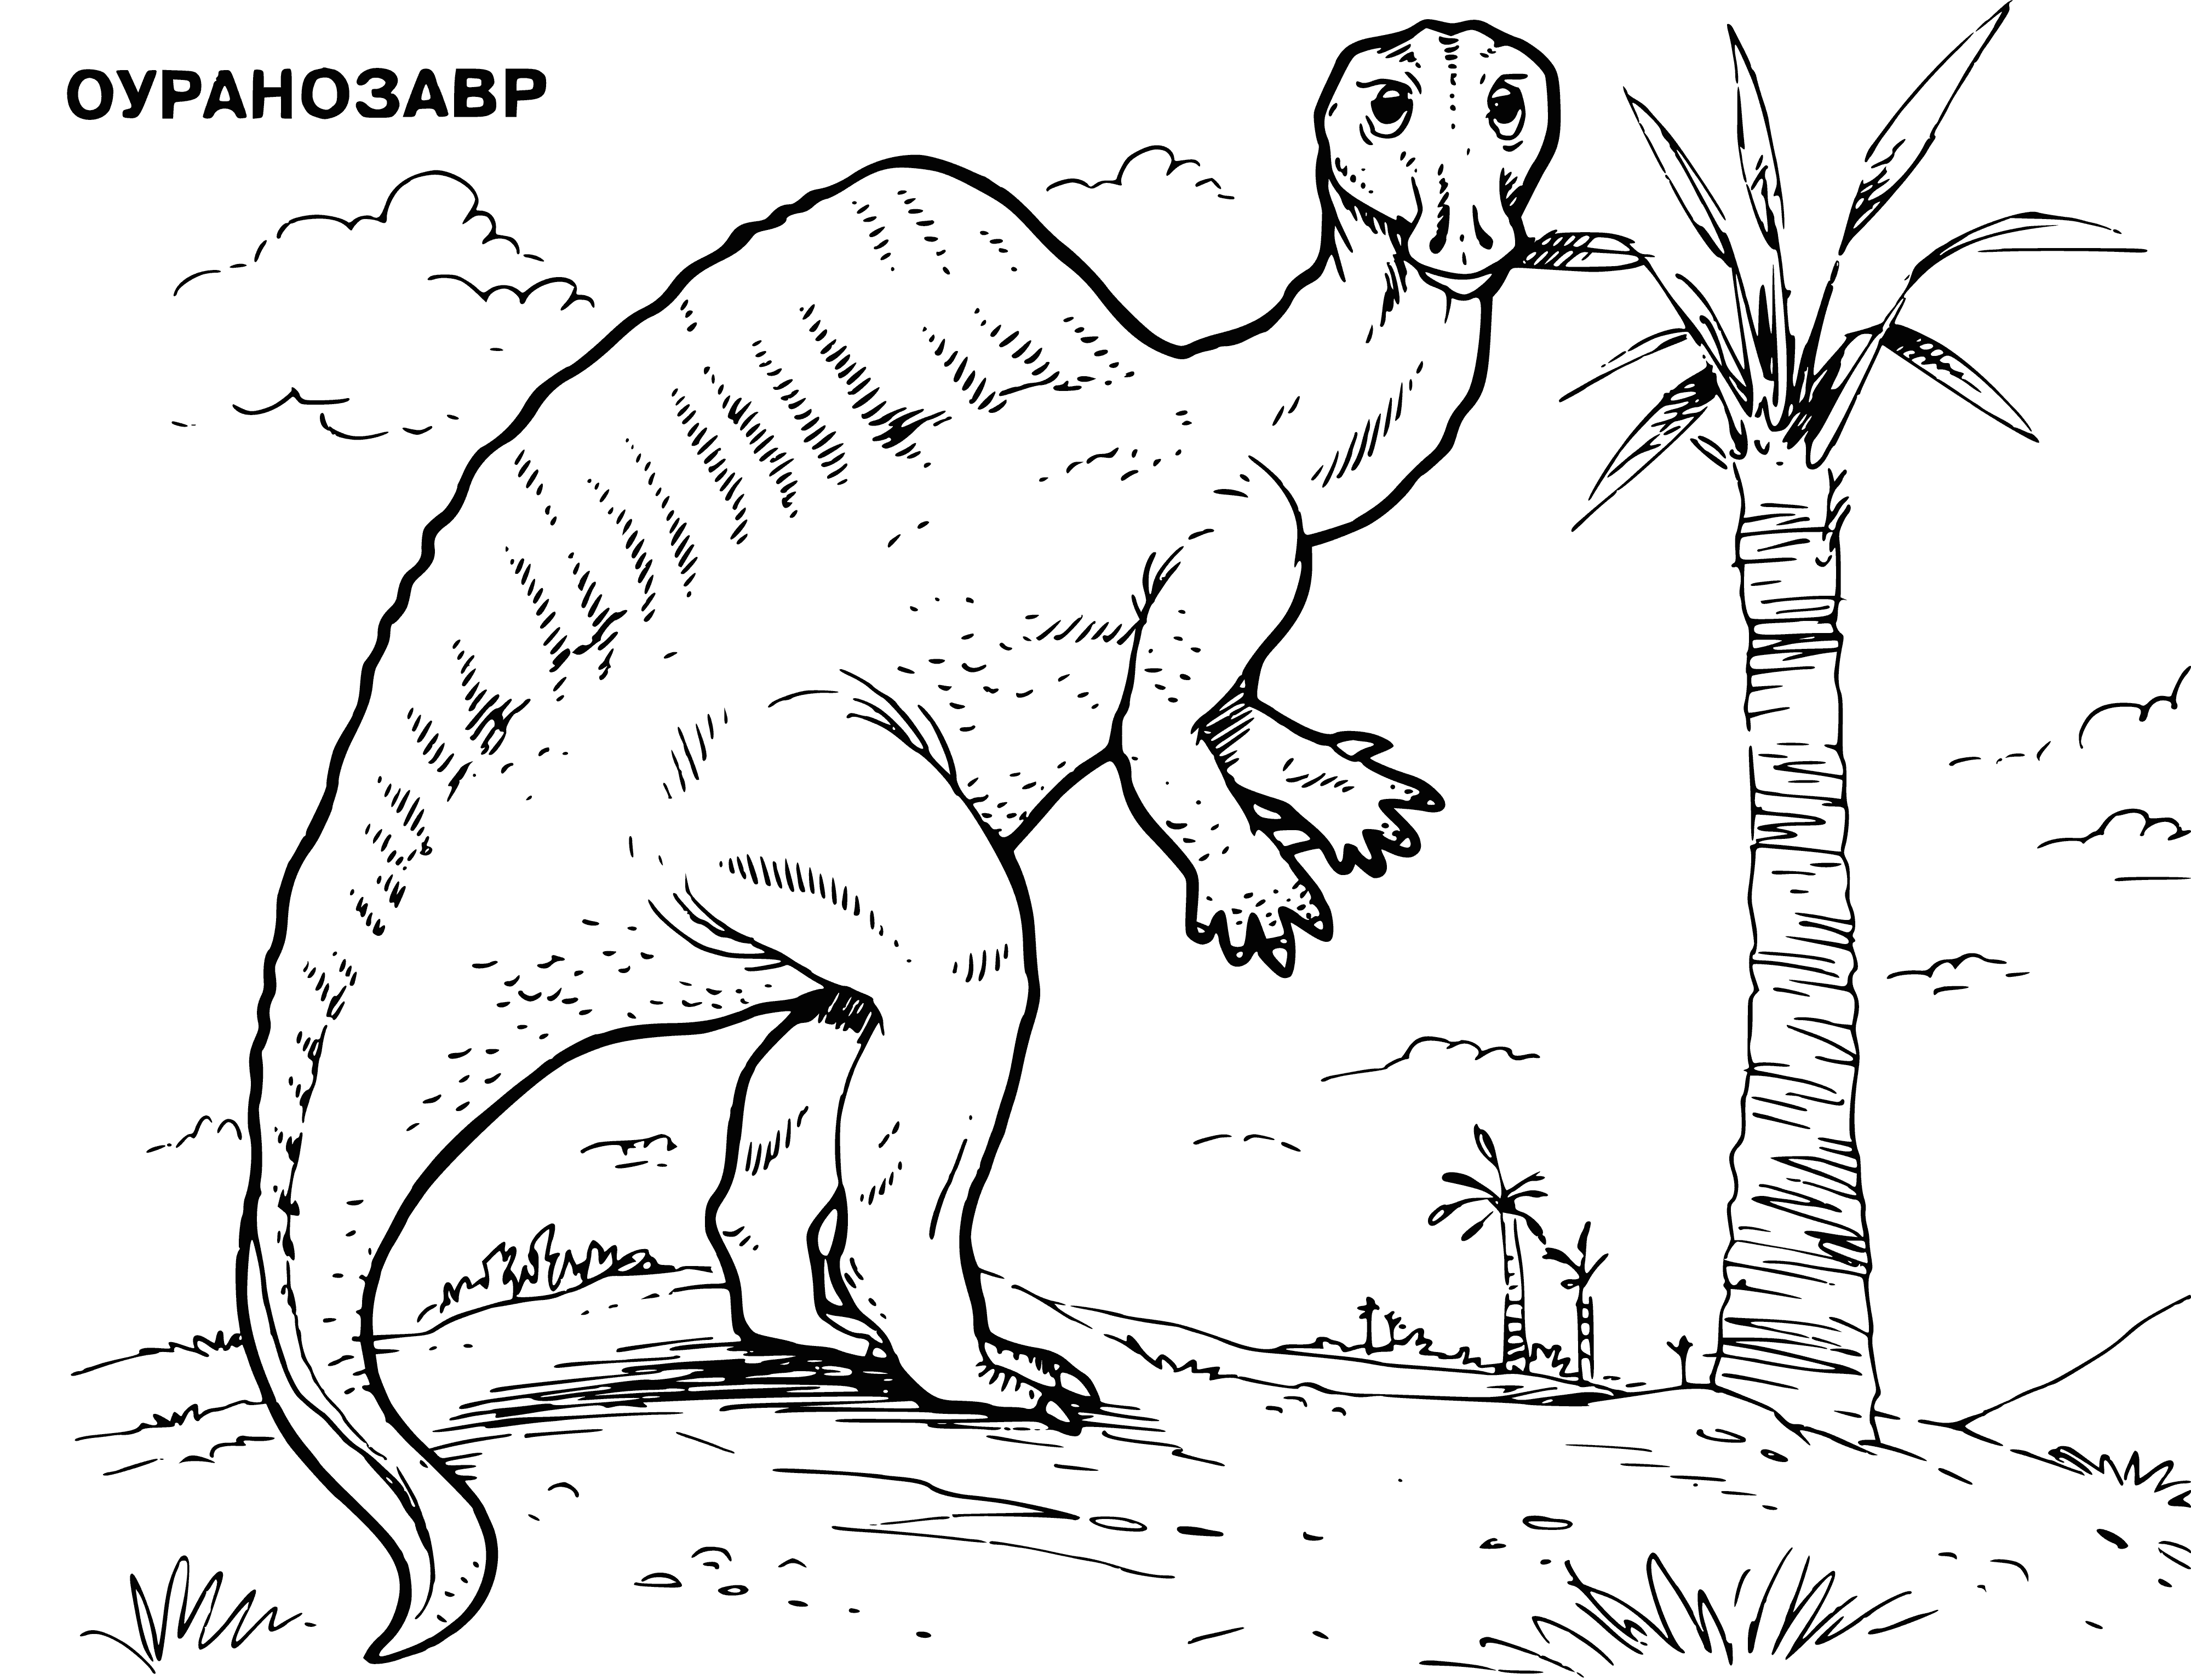 coloring page: Large, plant-eating dinosaur w/ long neck, small head, sharp teeth, 4 legs w/ 5 toes each. Lived 145-65 m. yrs ago, in Late Cretaceous.